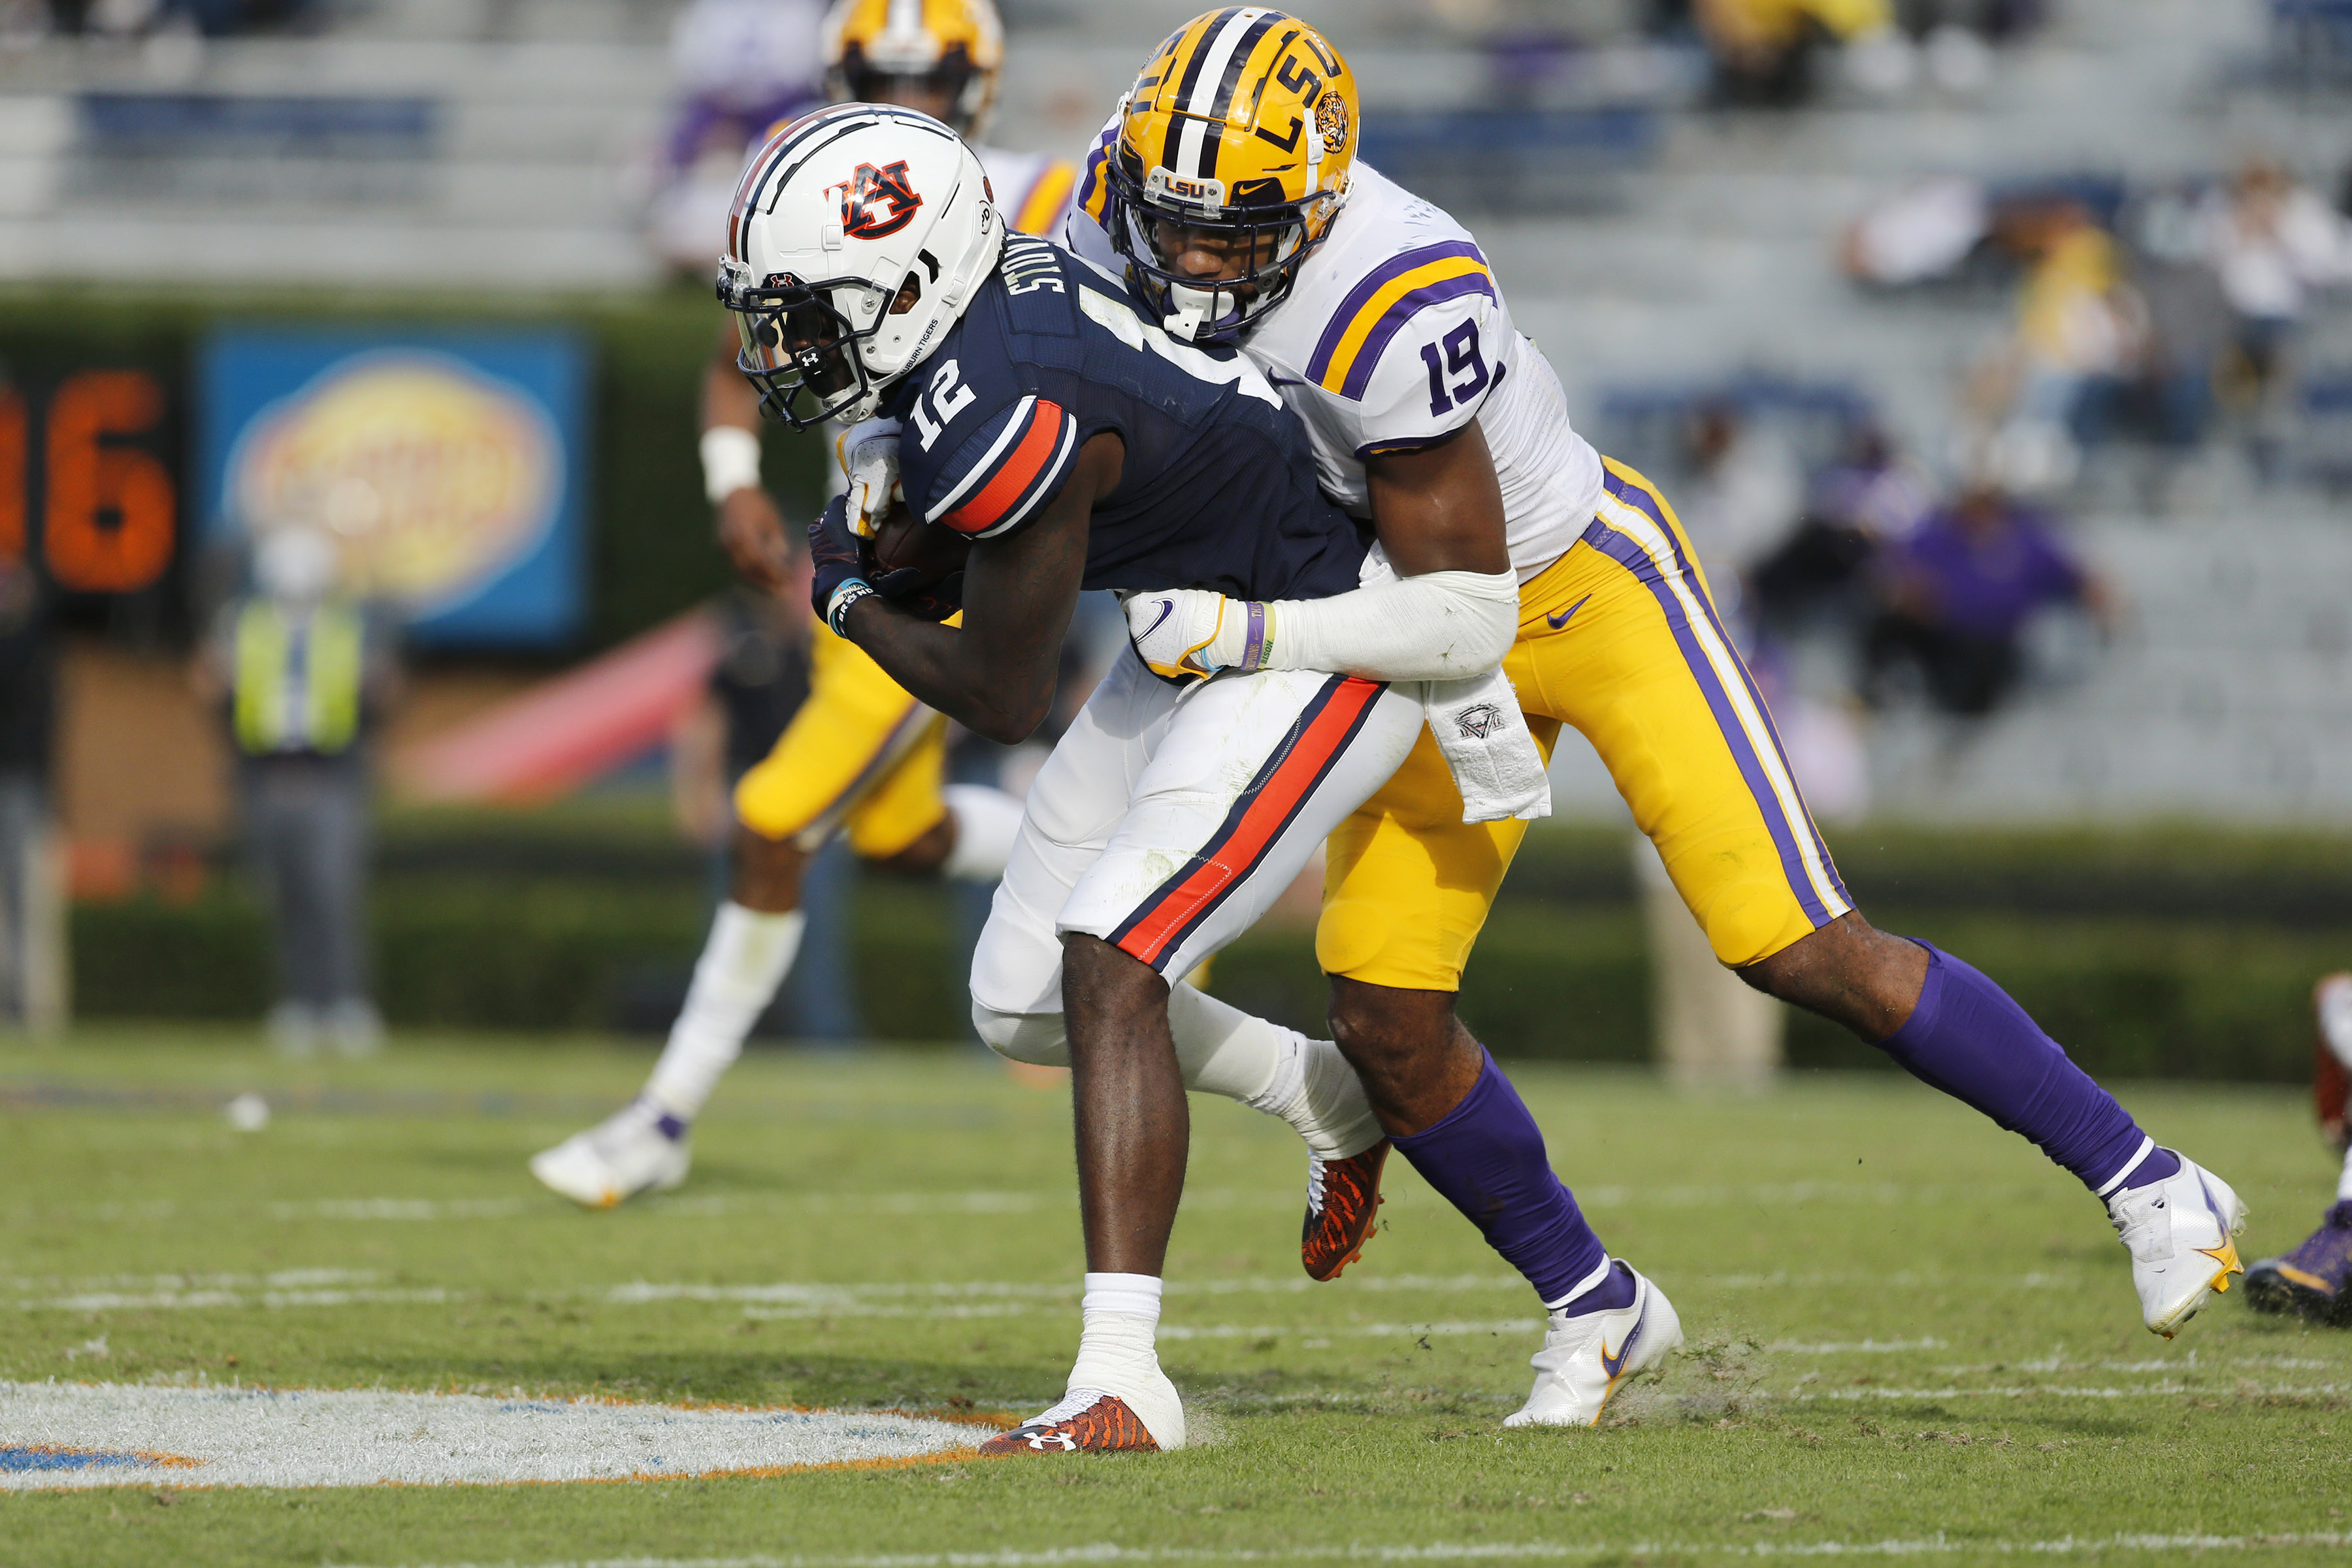 Auburn Tigers receiver Eli Stove (12) is tackled by LSU Tigers linebacker Jabril Cox (21) during the second quarter at Jordan-Hare Stadium.